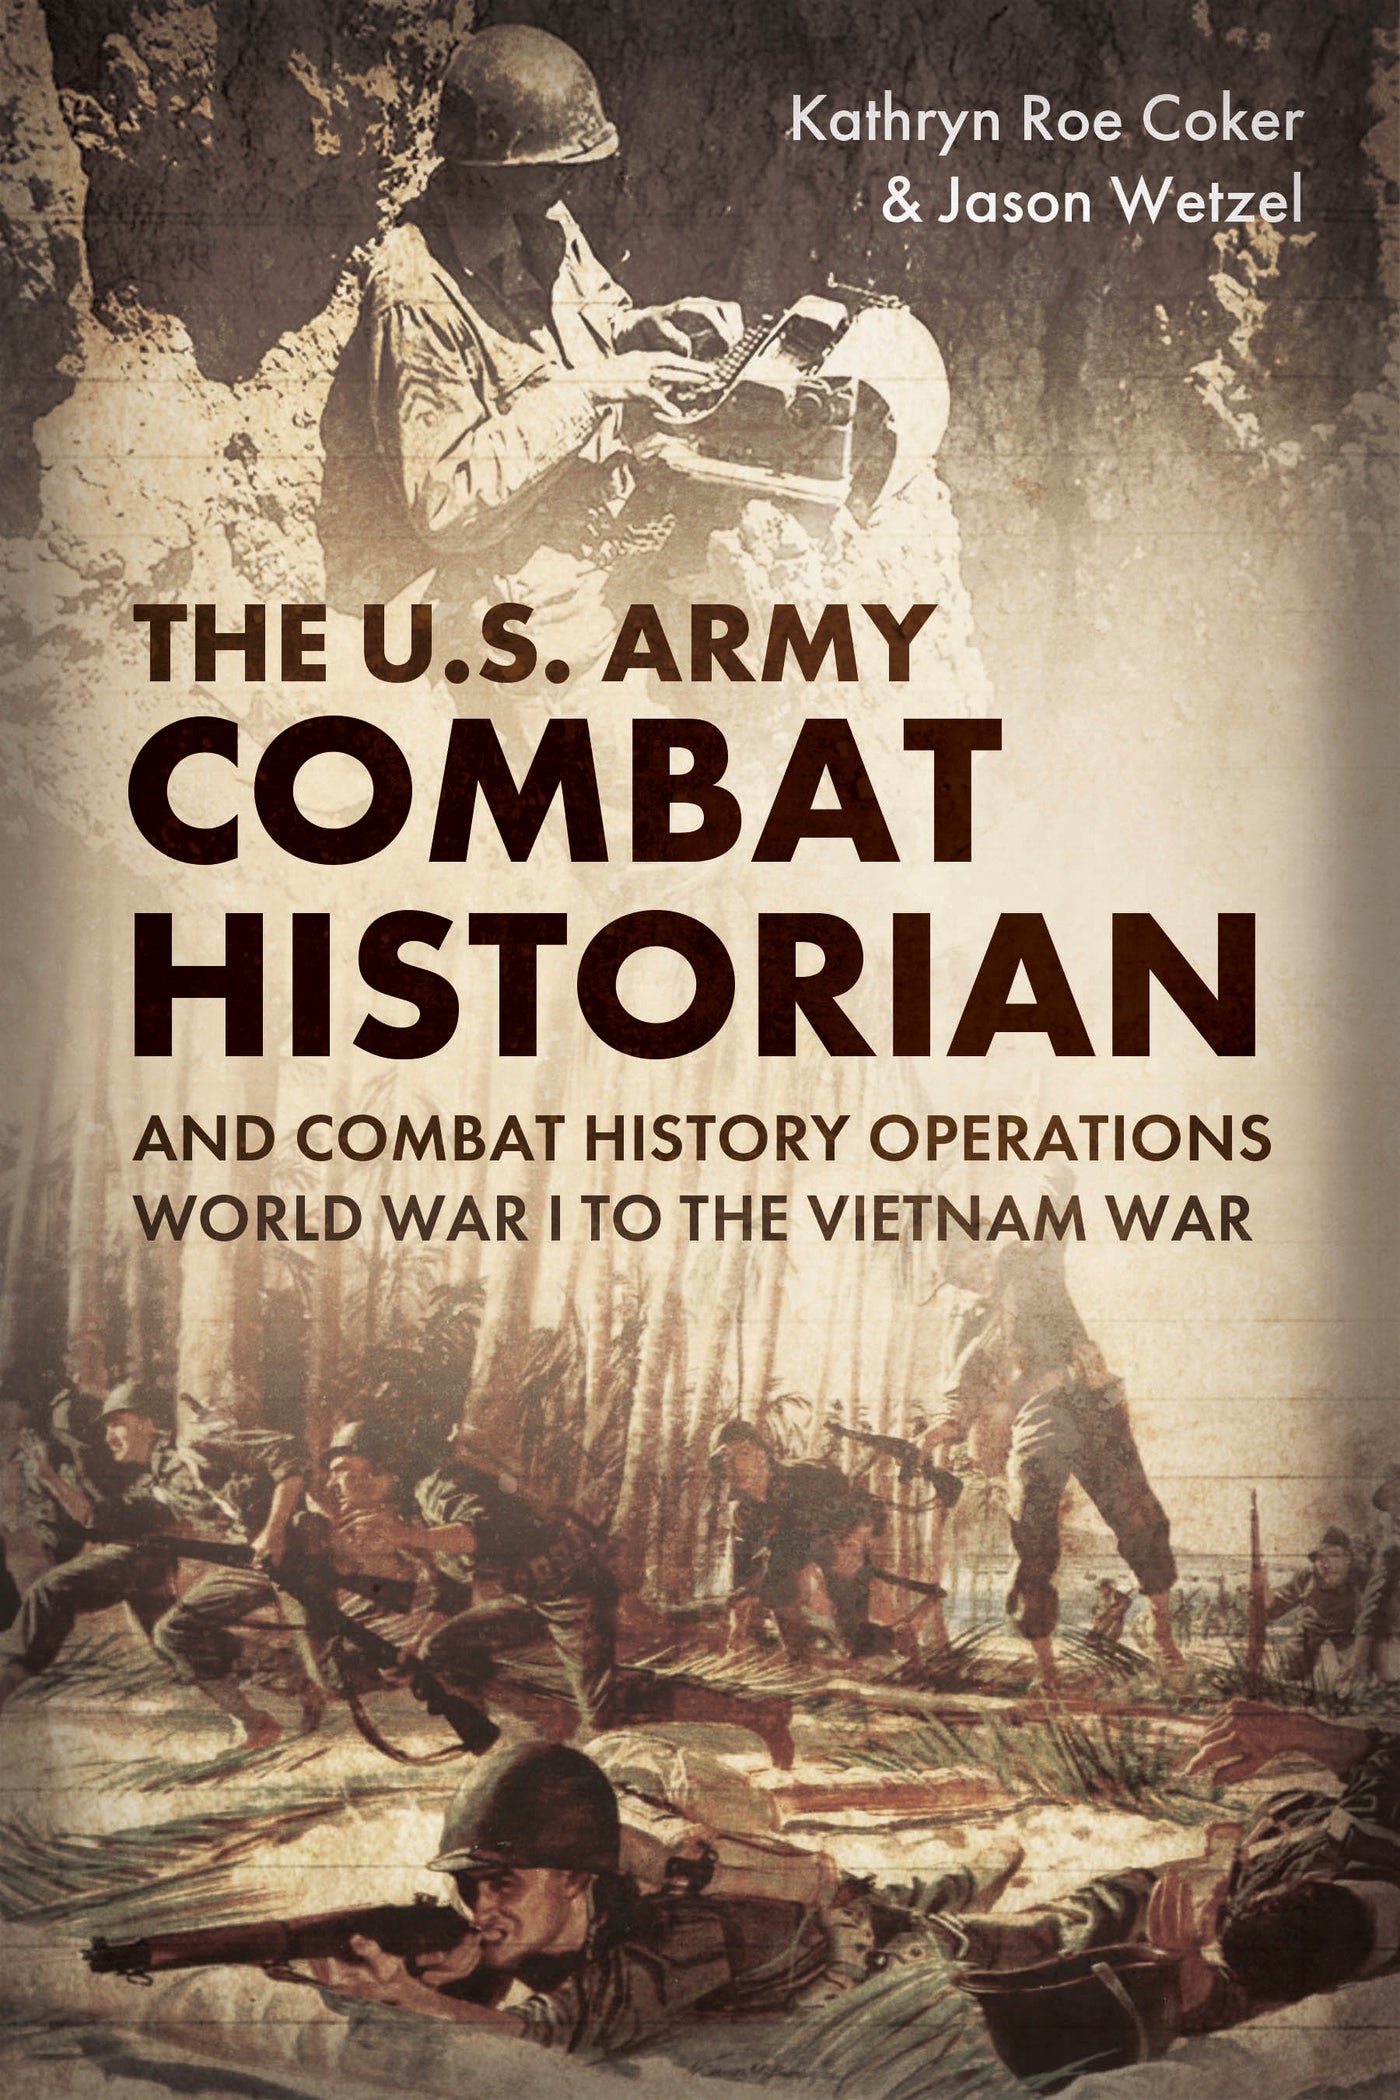 The U.S. Army Combat Historian and Combat History Operations